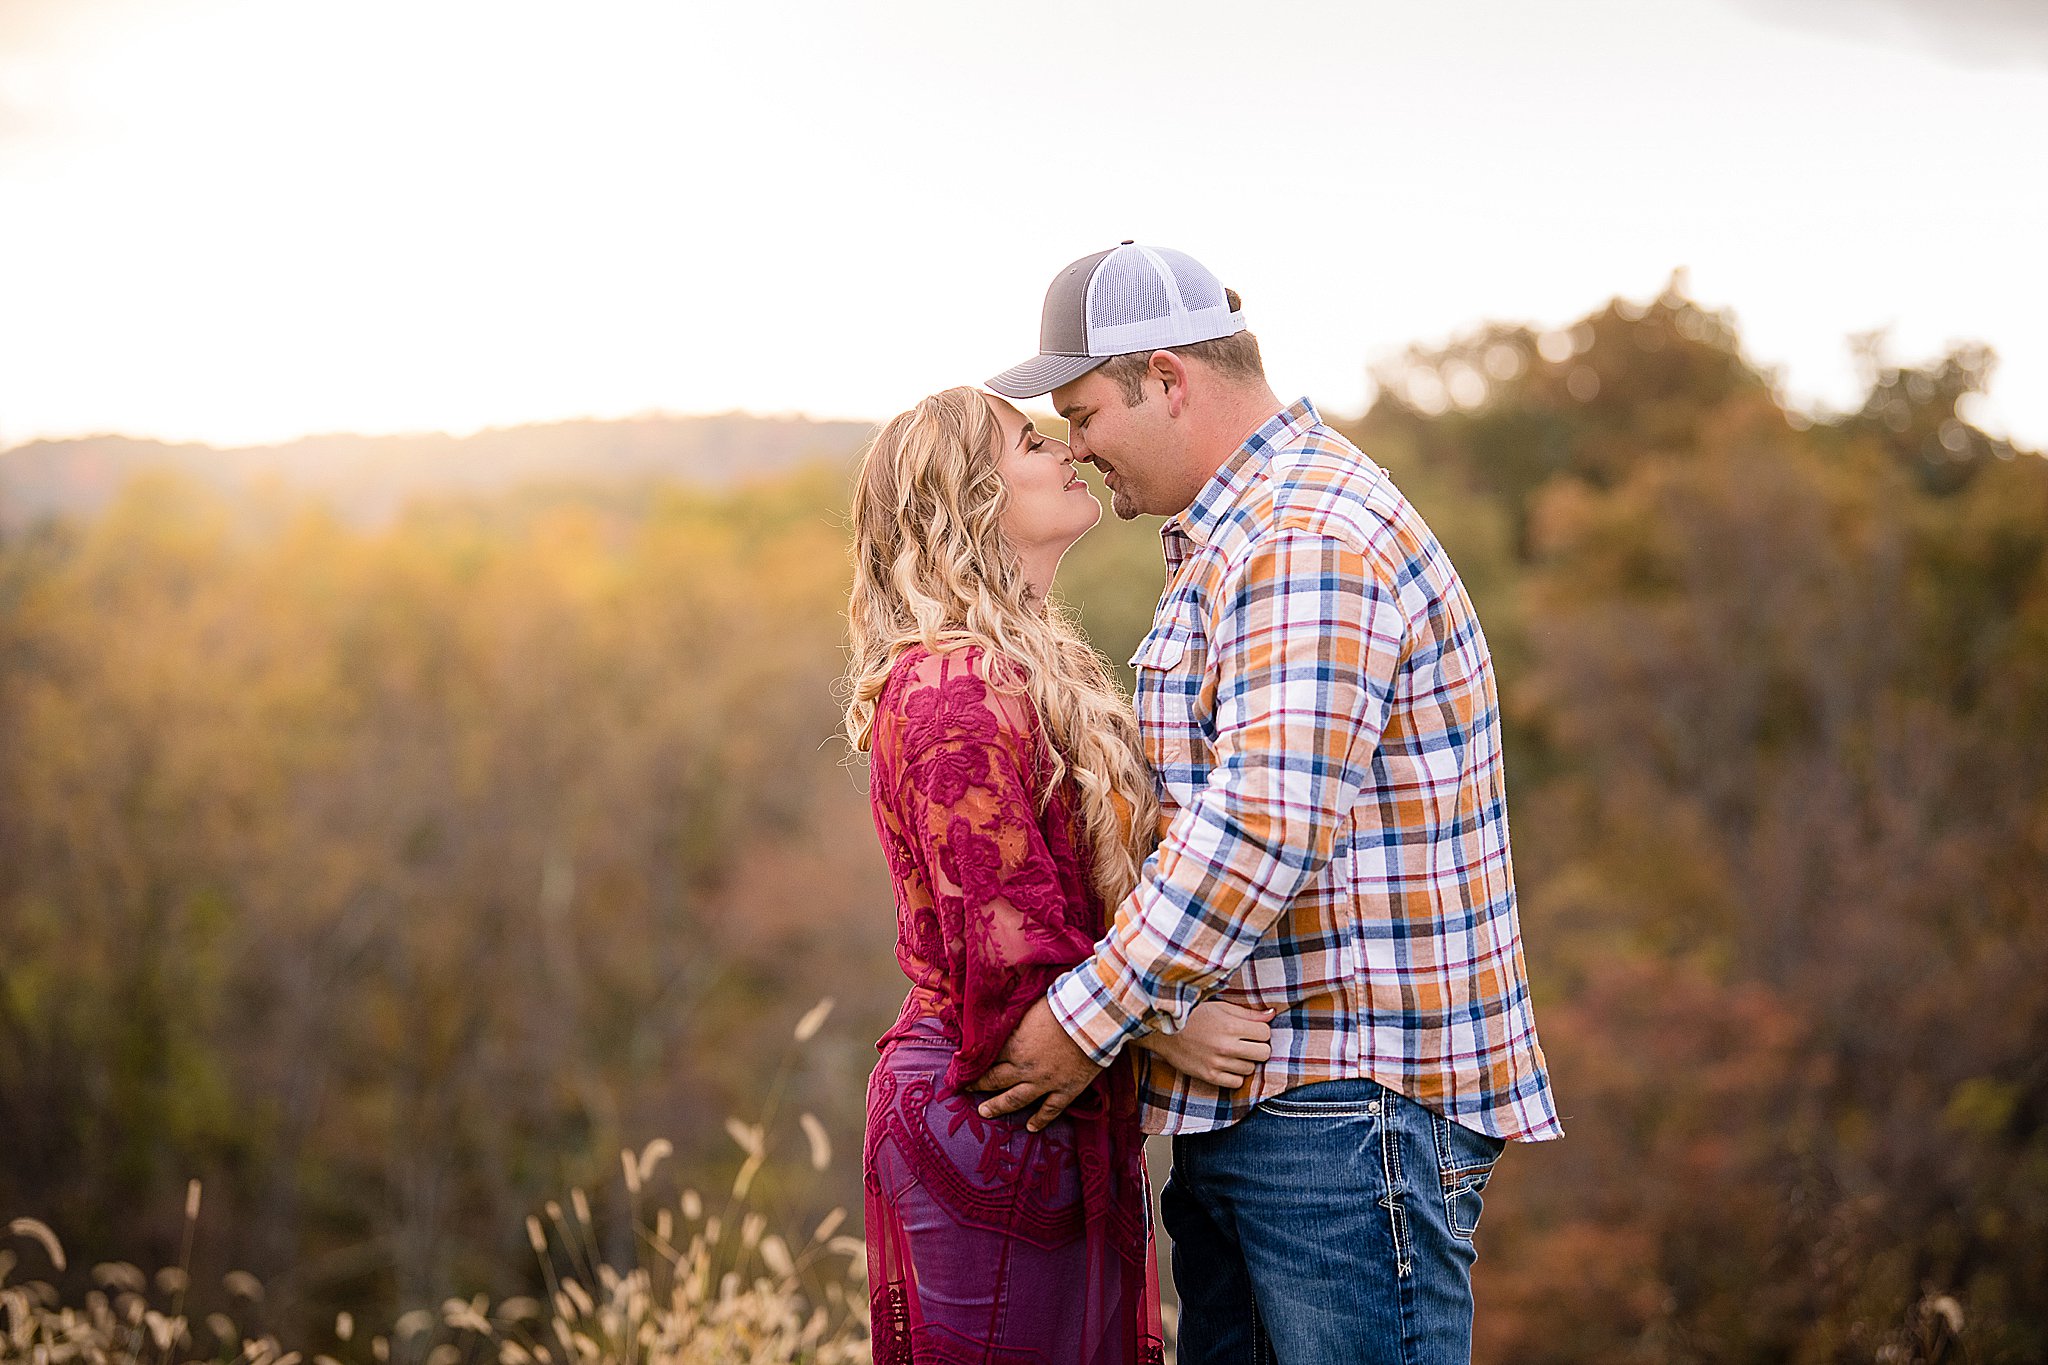 Joselyn and Trevor's Engagement Session - Lori Pickens Photography - Parkersburg, WV